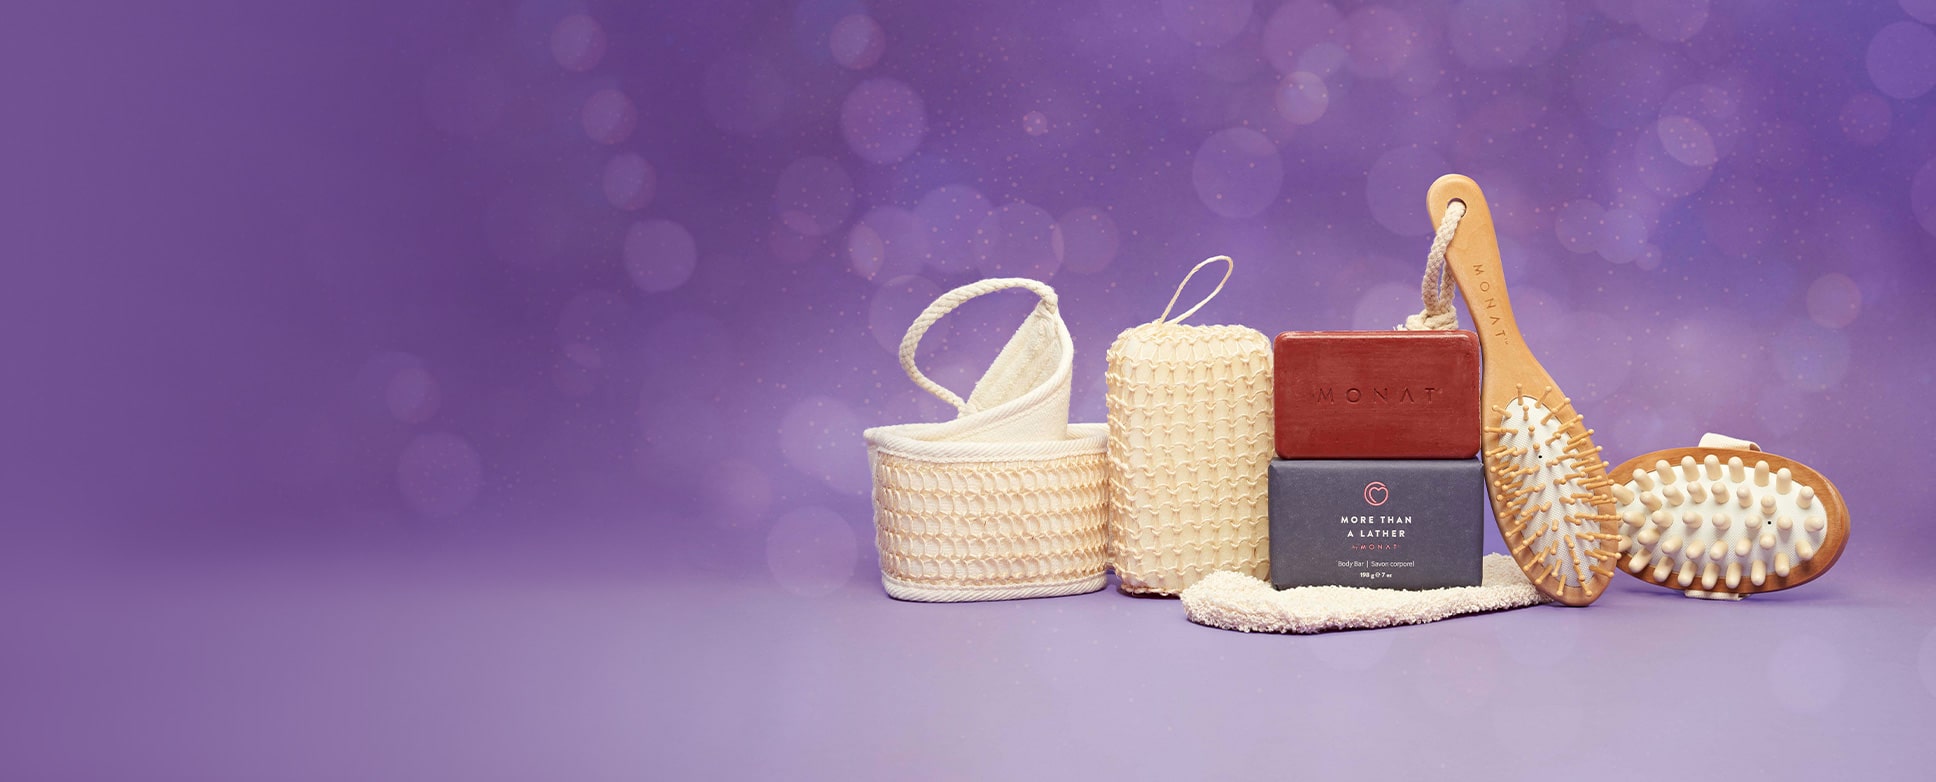 picture of more than a Lather Holiday set on a purple background 